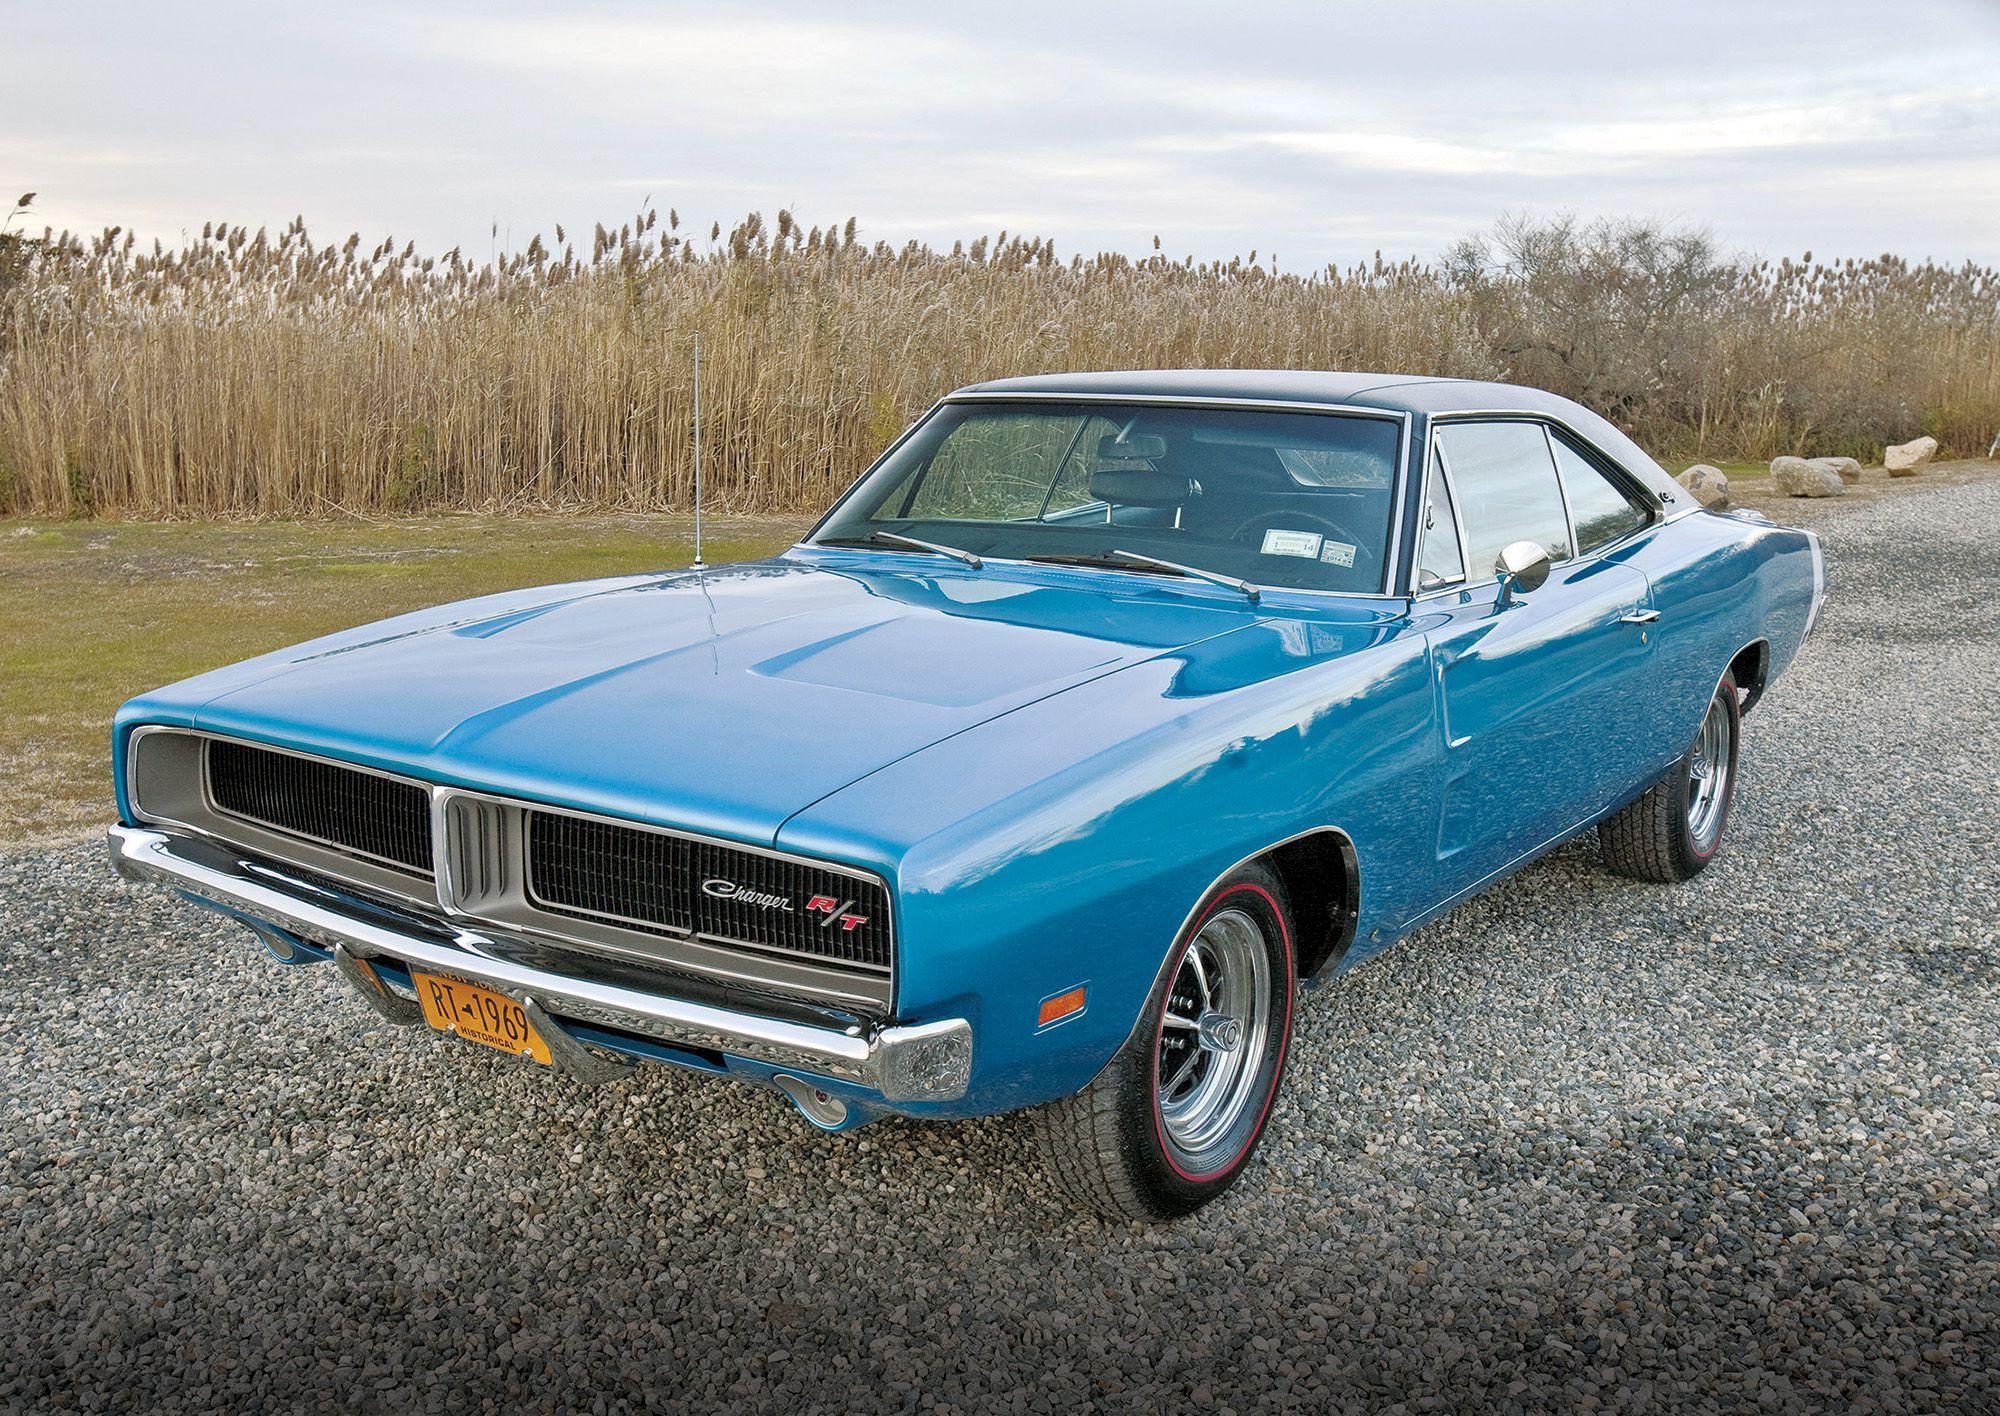 The 440-powered 1969 Dodge Charger R/T remains a solid investment